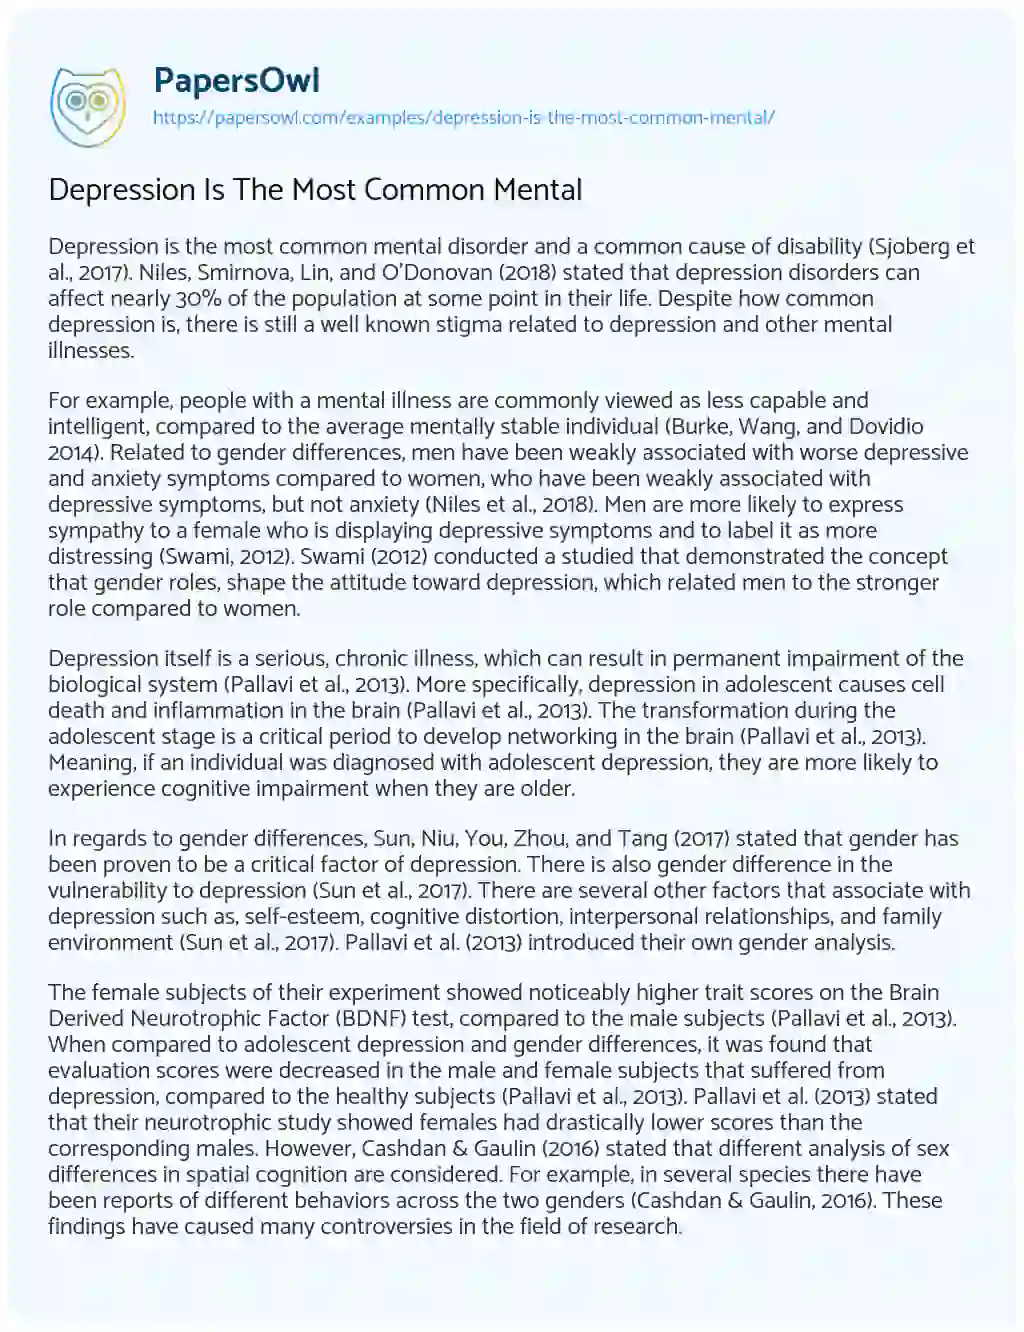 Essay on Depression is the most Common Mental